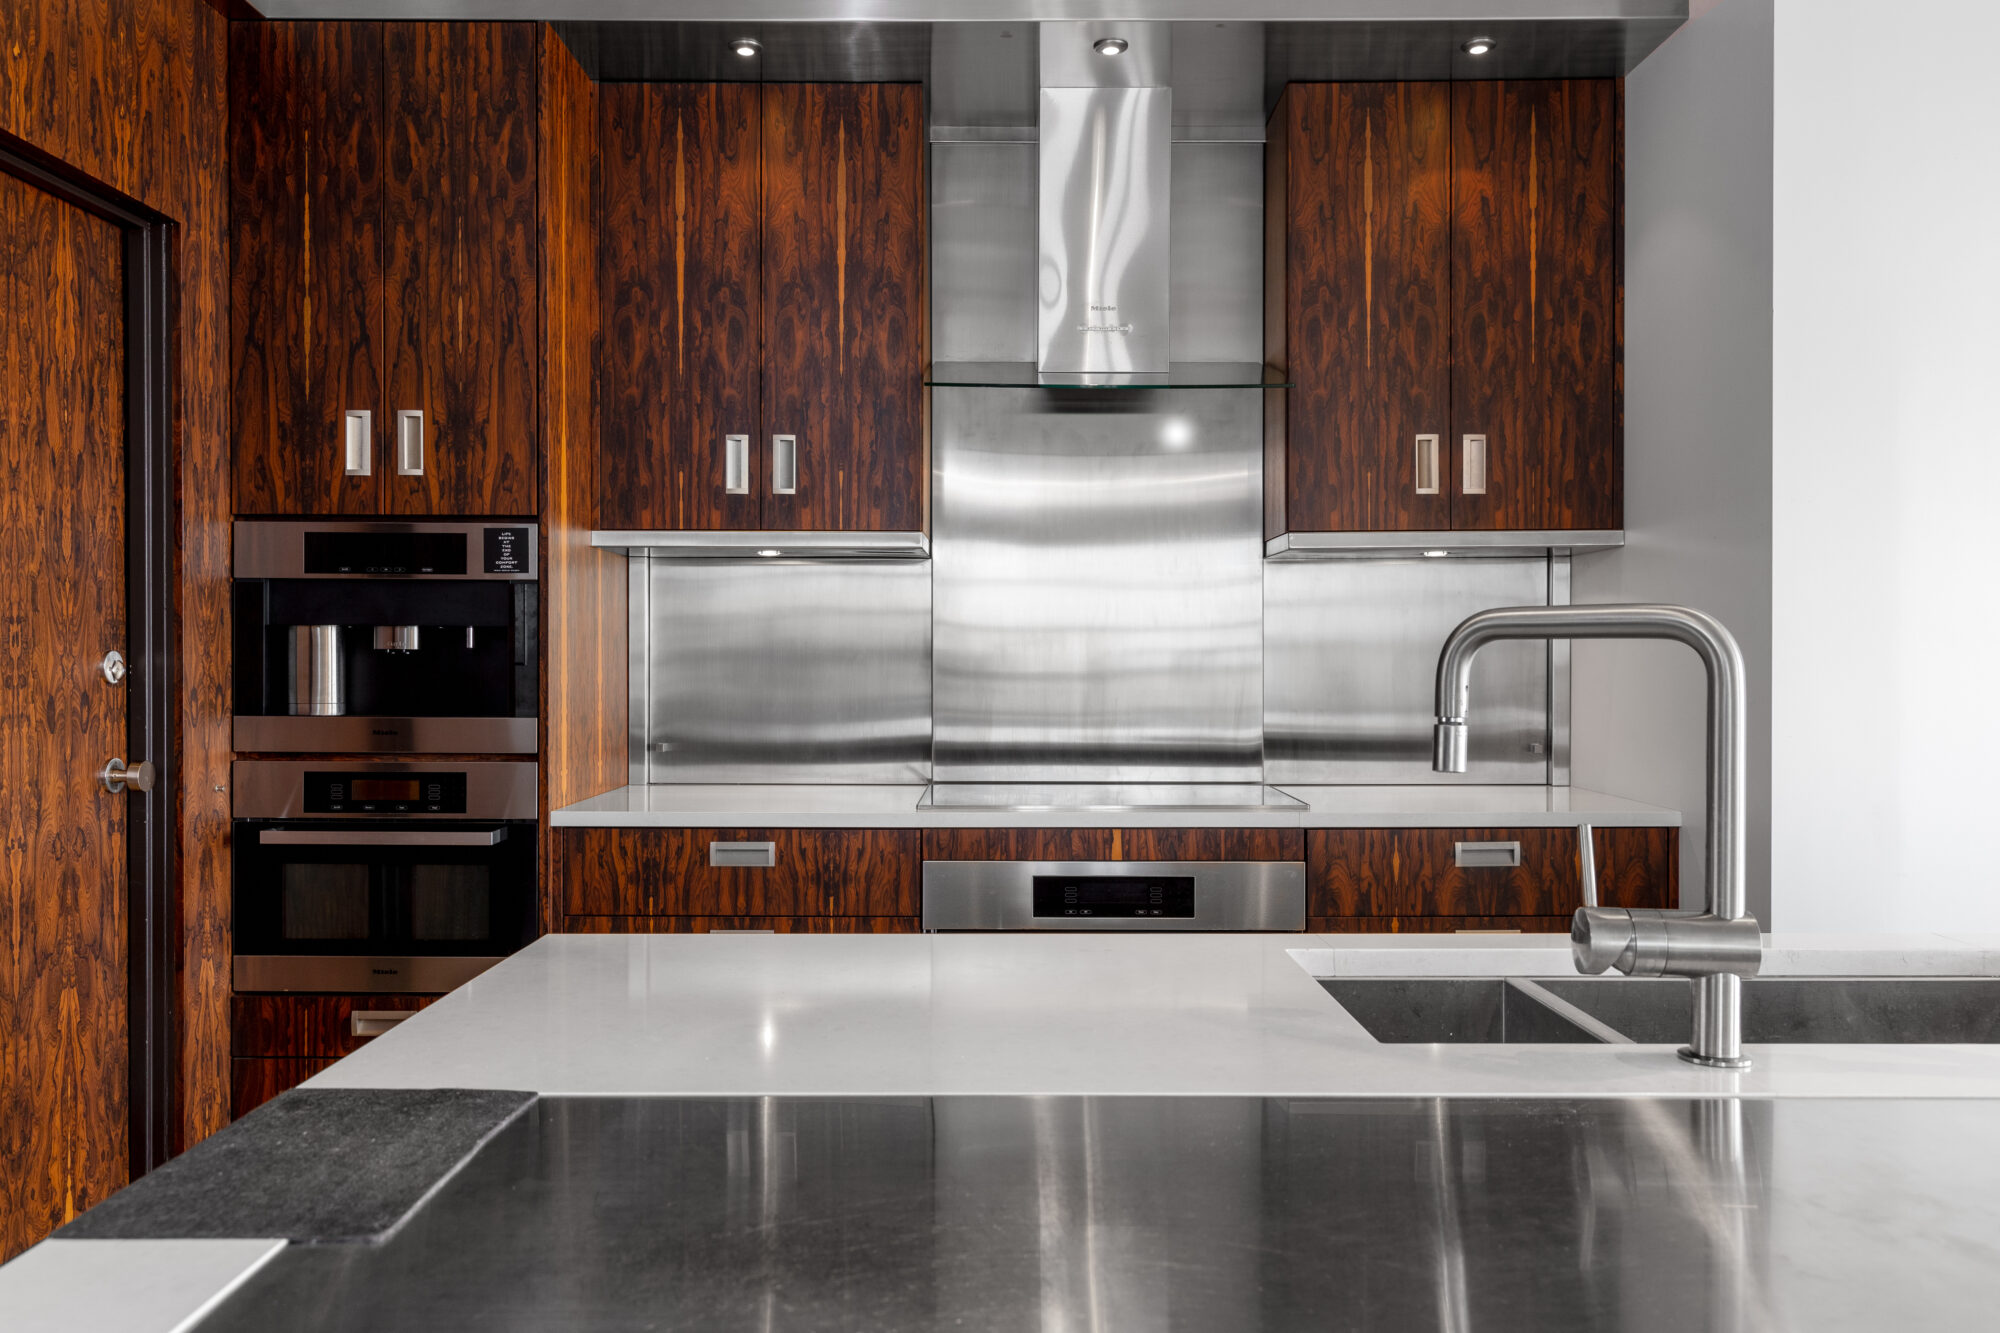 Newly remodeled kitchen featuring an eye-catching mix of dark, contemporary cabinets and gleaming stainless steel cooktop, oven, and backsplash.